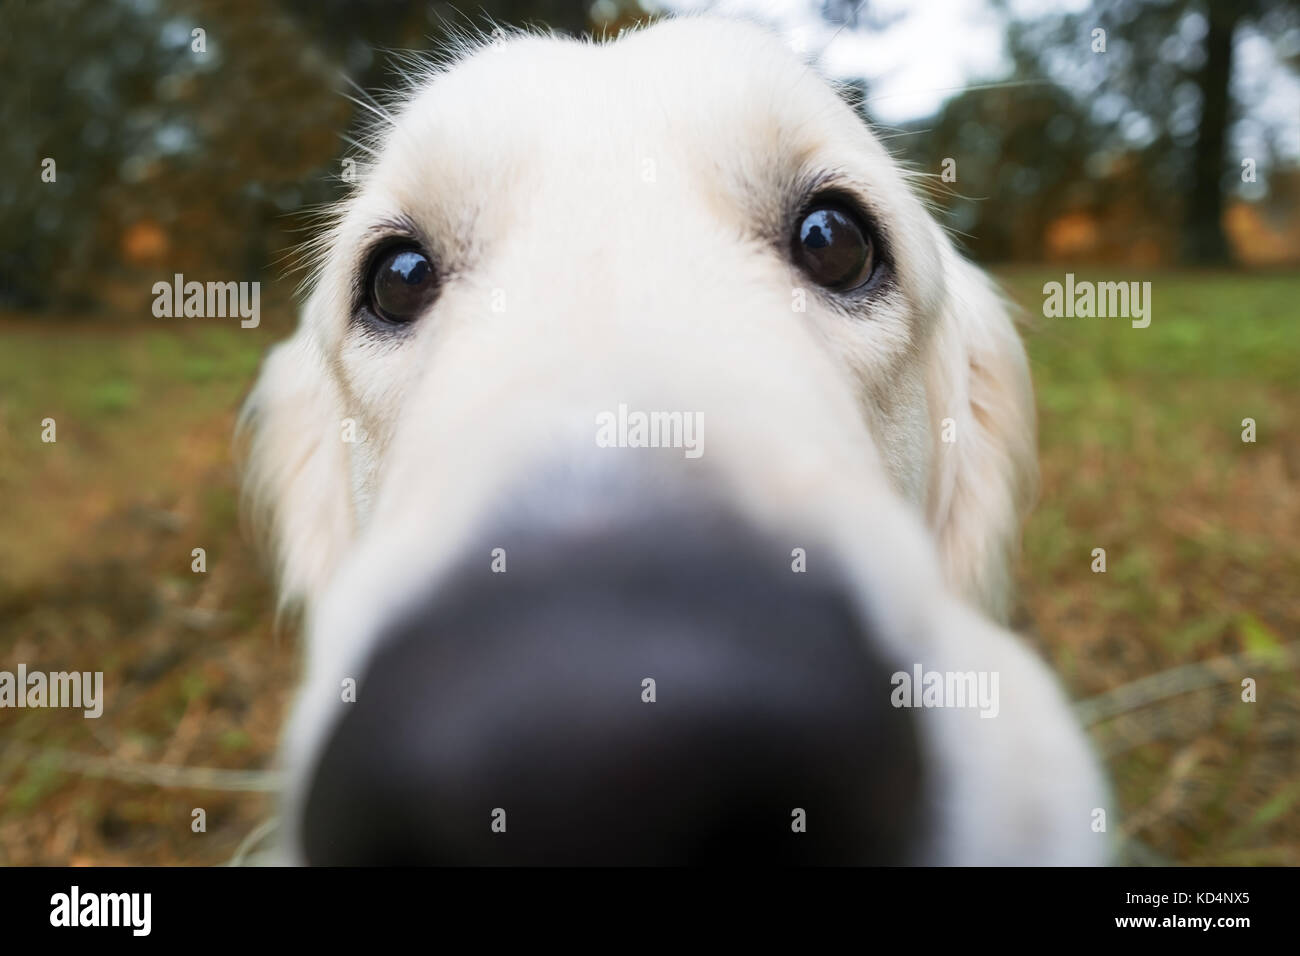 Blurred nose of a golden retriever. Walking in the fresh air with a dog. Stock Photo